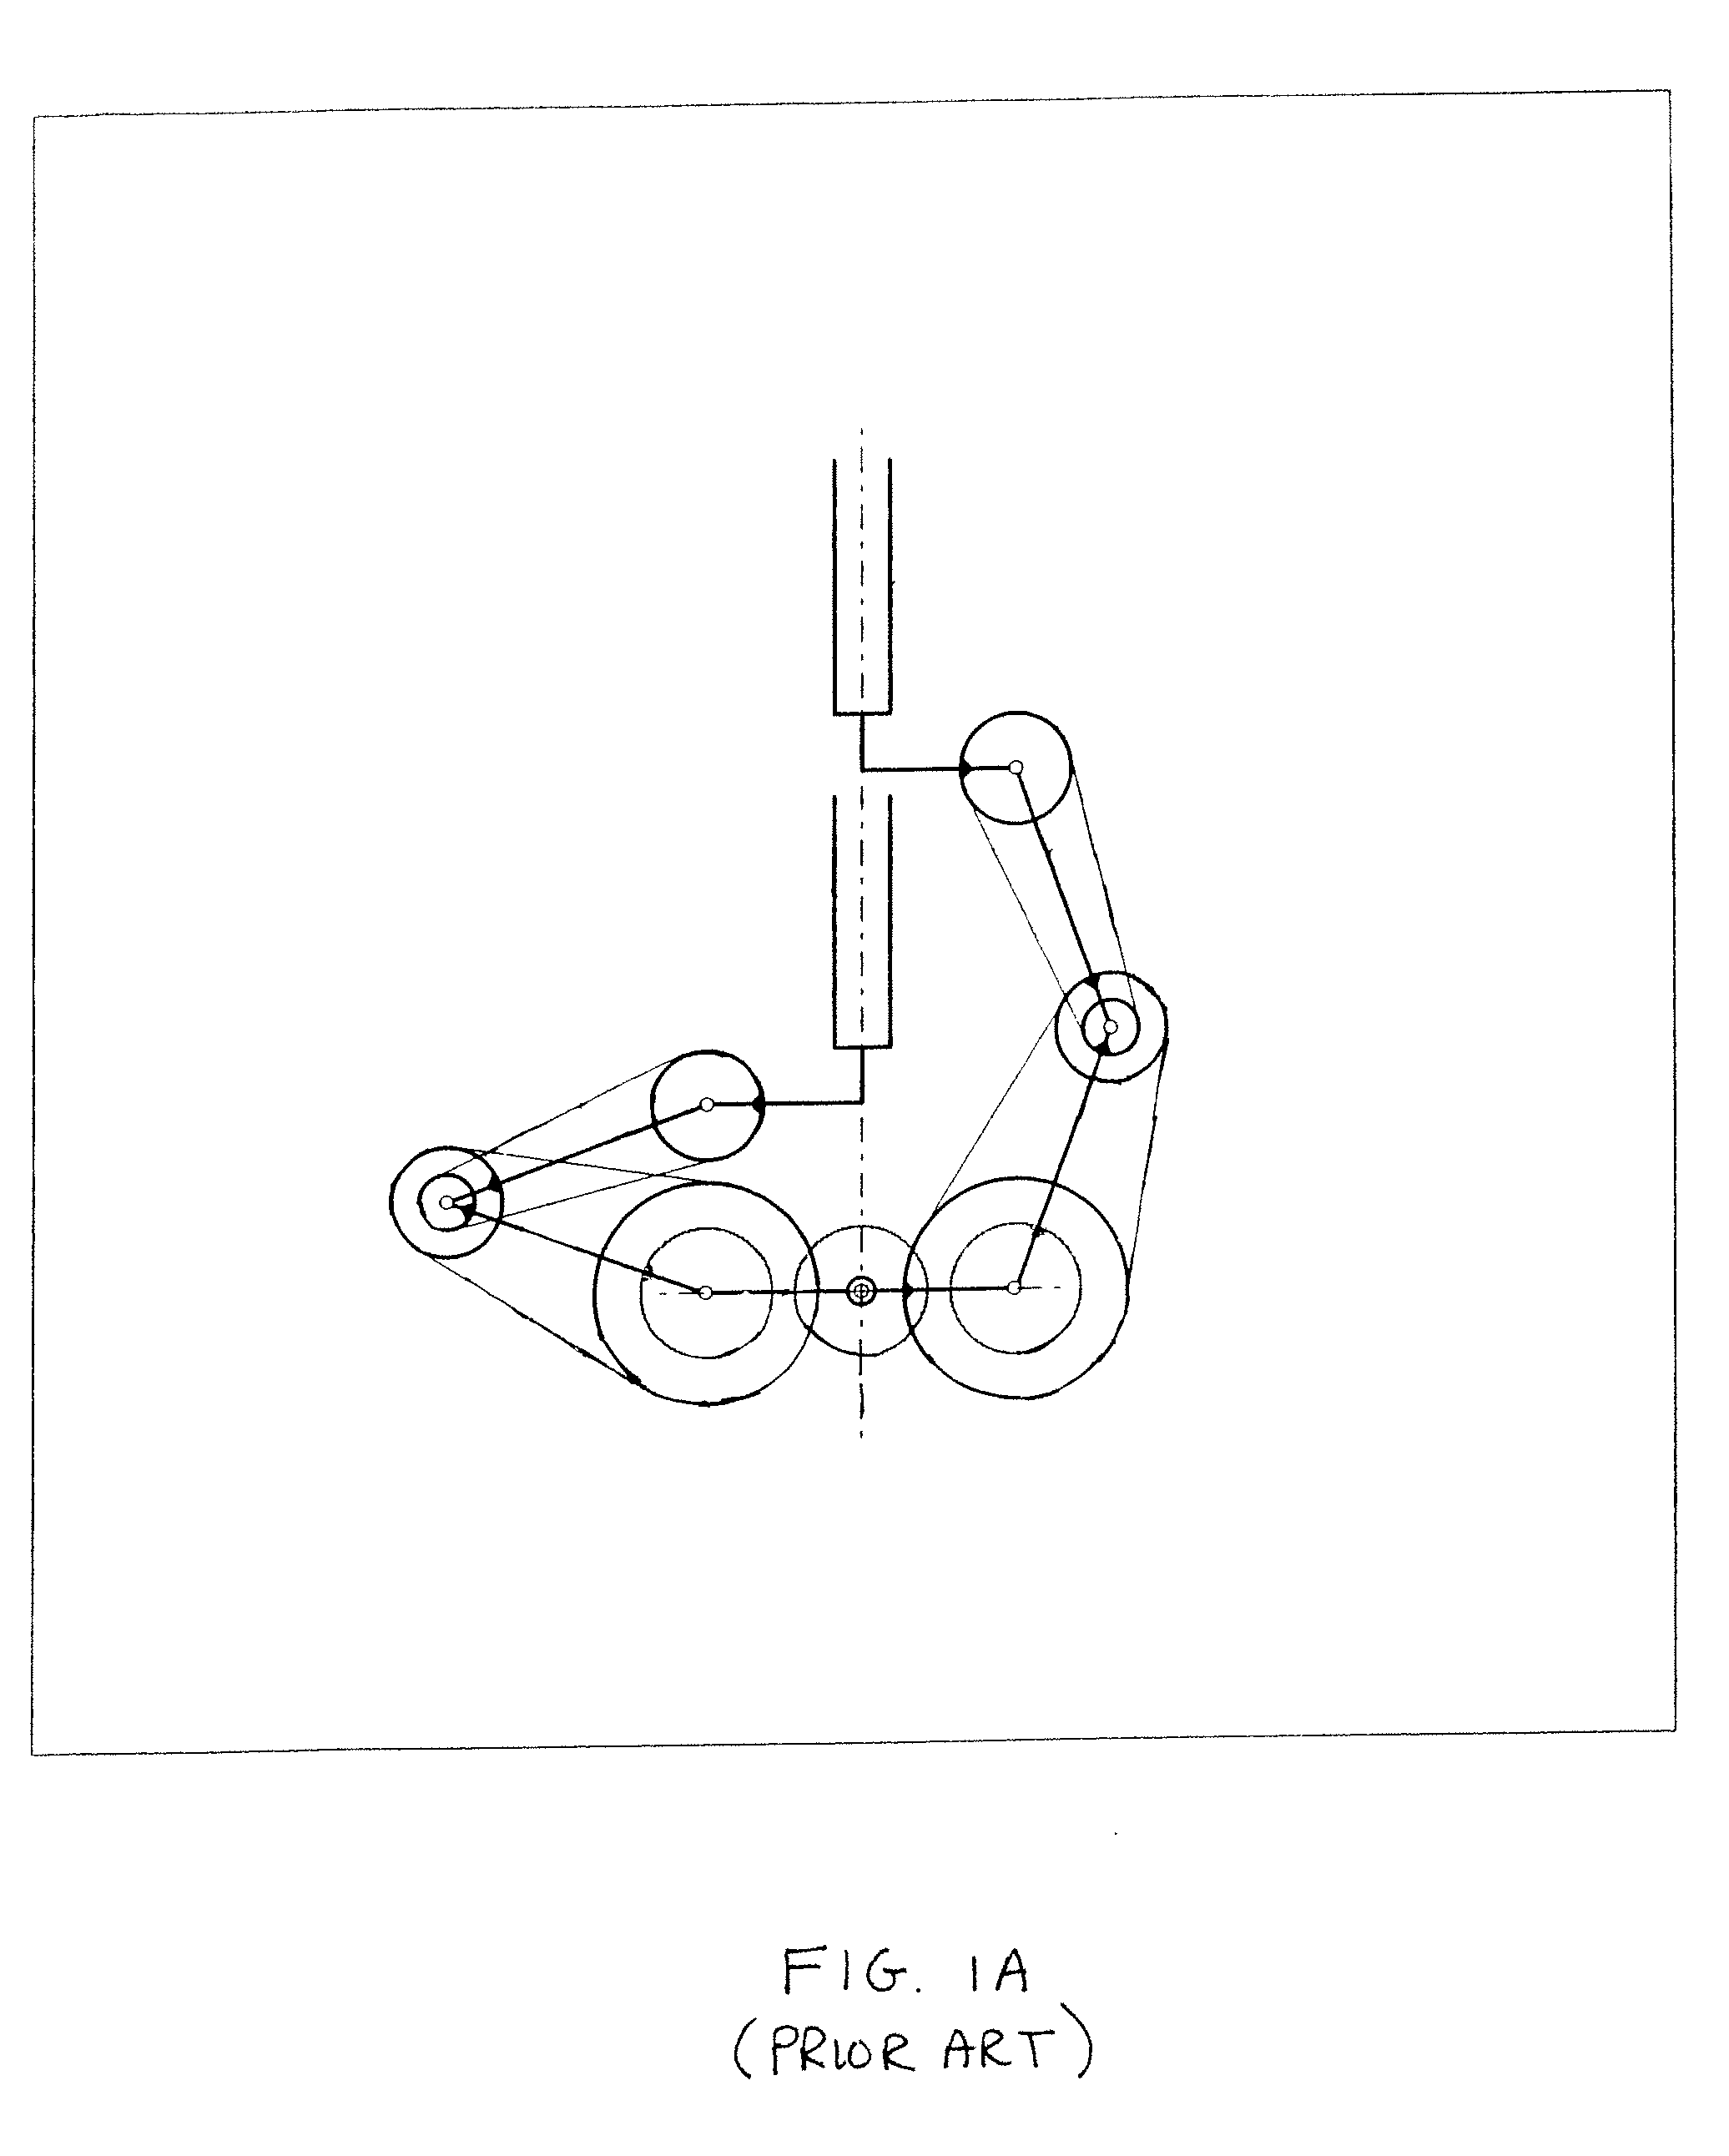 Substrate transport apparatus with multiple independently movable articulated arms